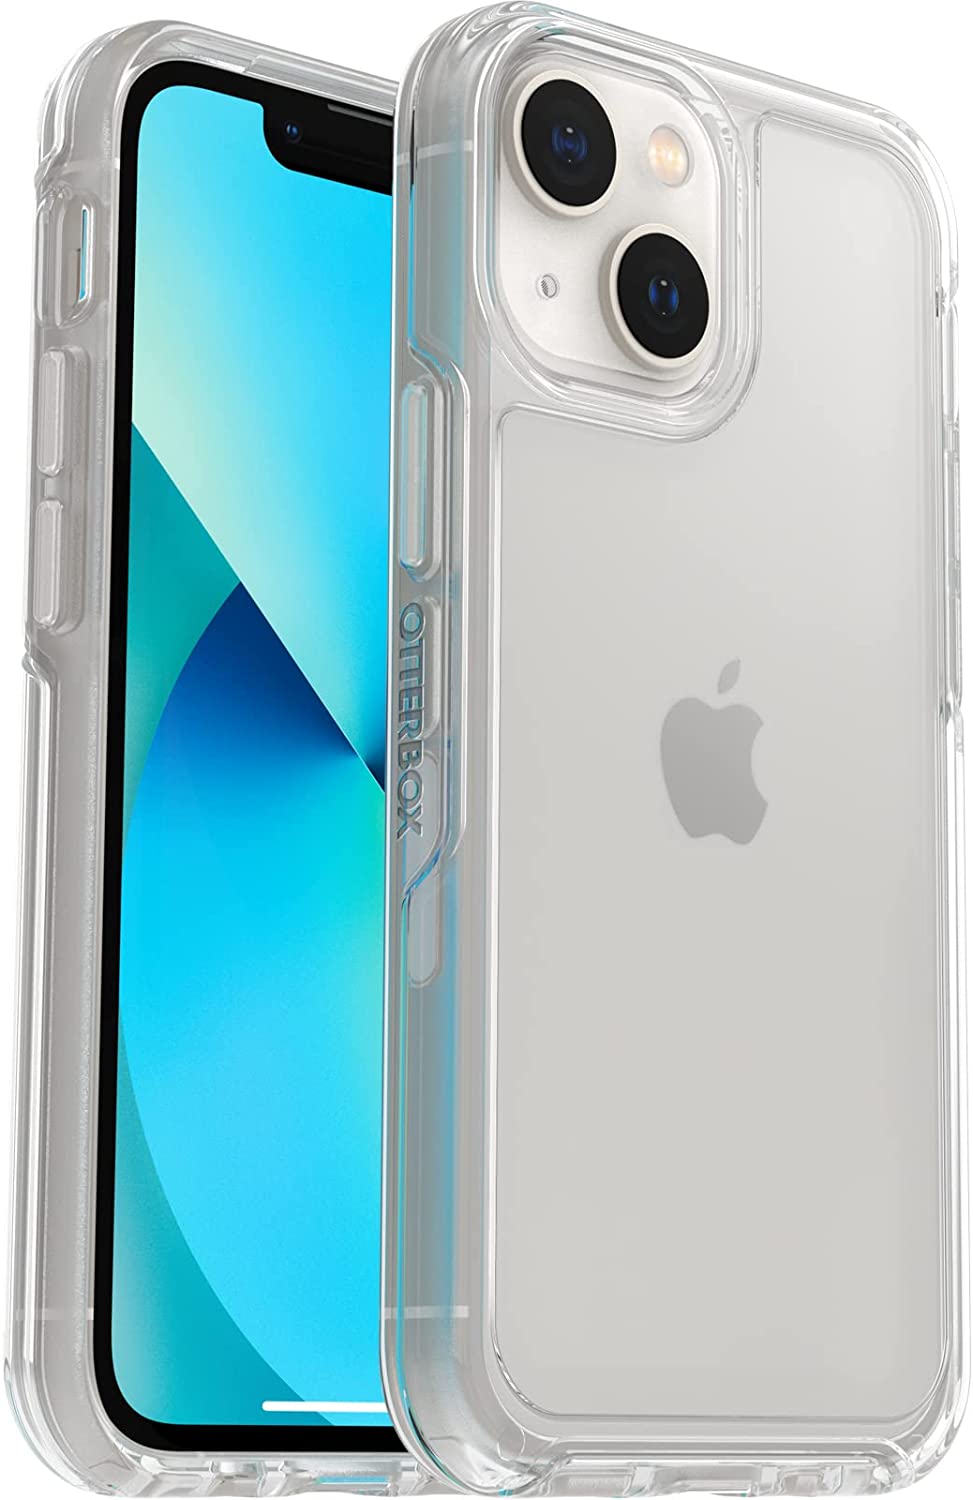 OtterBox SYMMETRY SERIES Case for iPhone 13 Mini/iPhone 12 Mini - Clear (New)